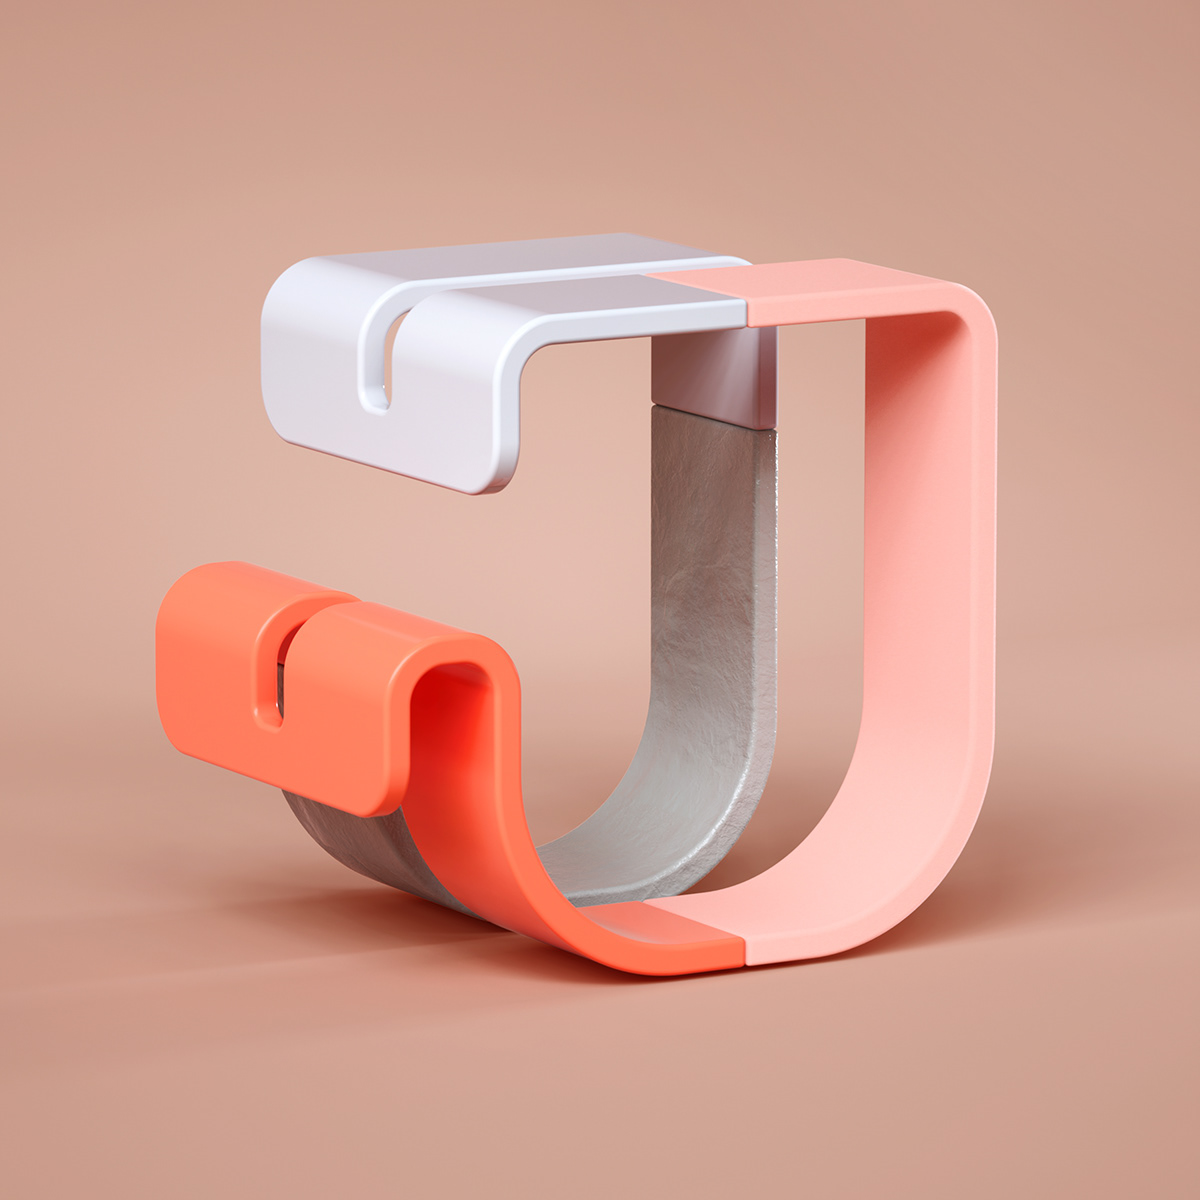 36daysoftype 3D numbers letters alphabets ufho singapore c4d 36days type